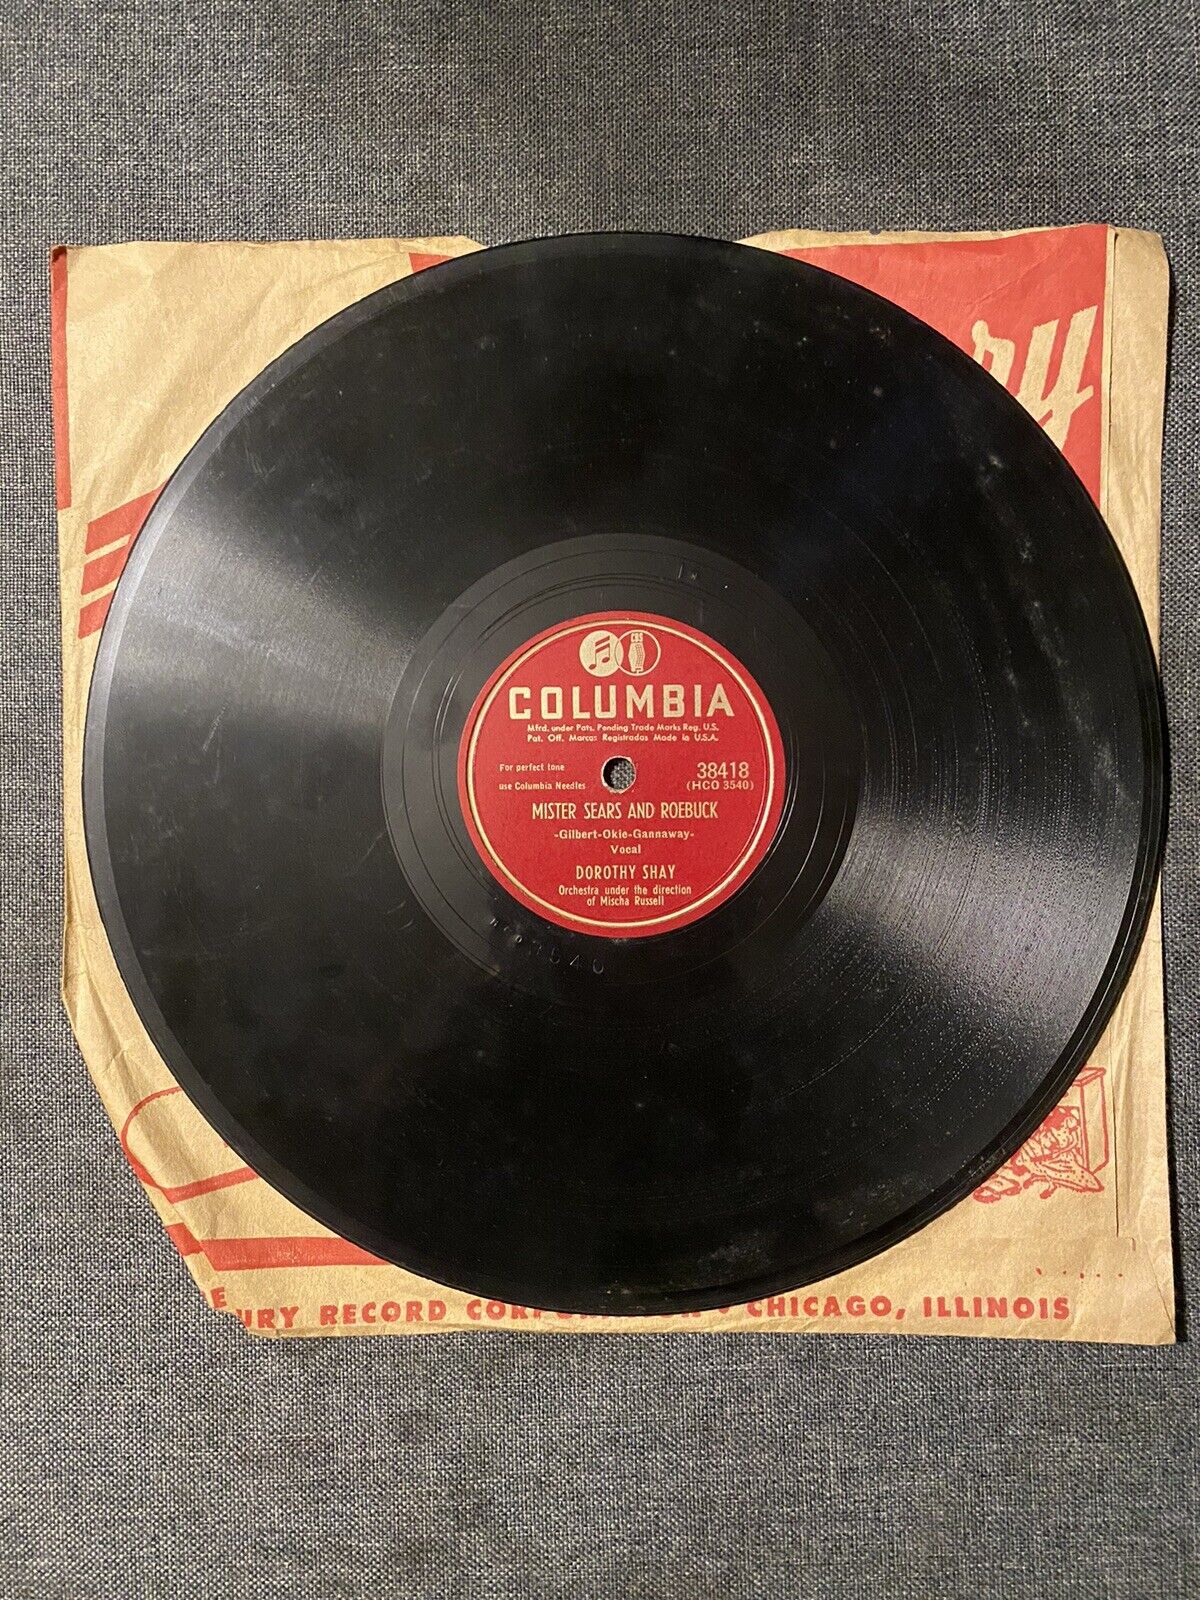 Vtg 78 Dorothy Shay Mister Sears Roebuck You Broke Your Promise Columbia Records